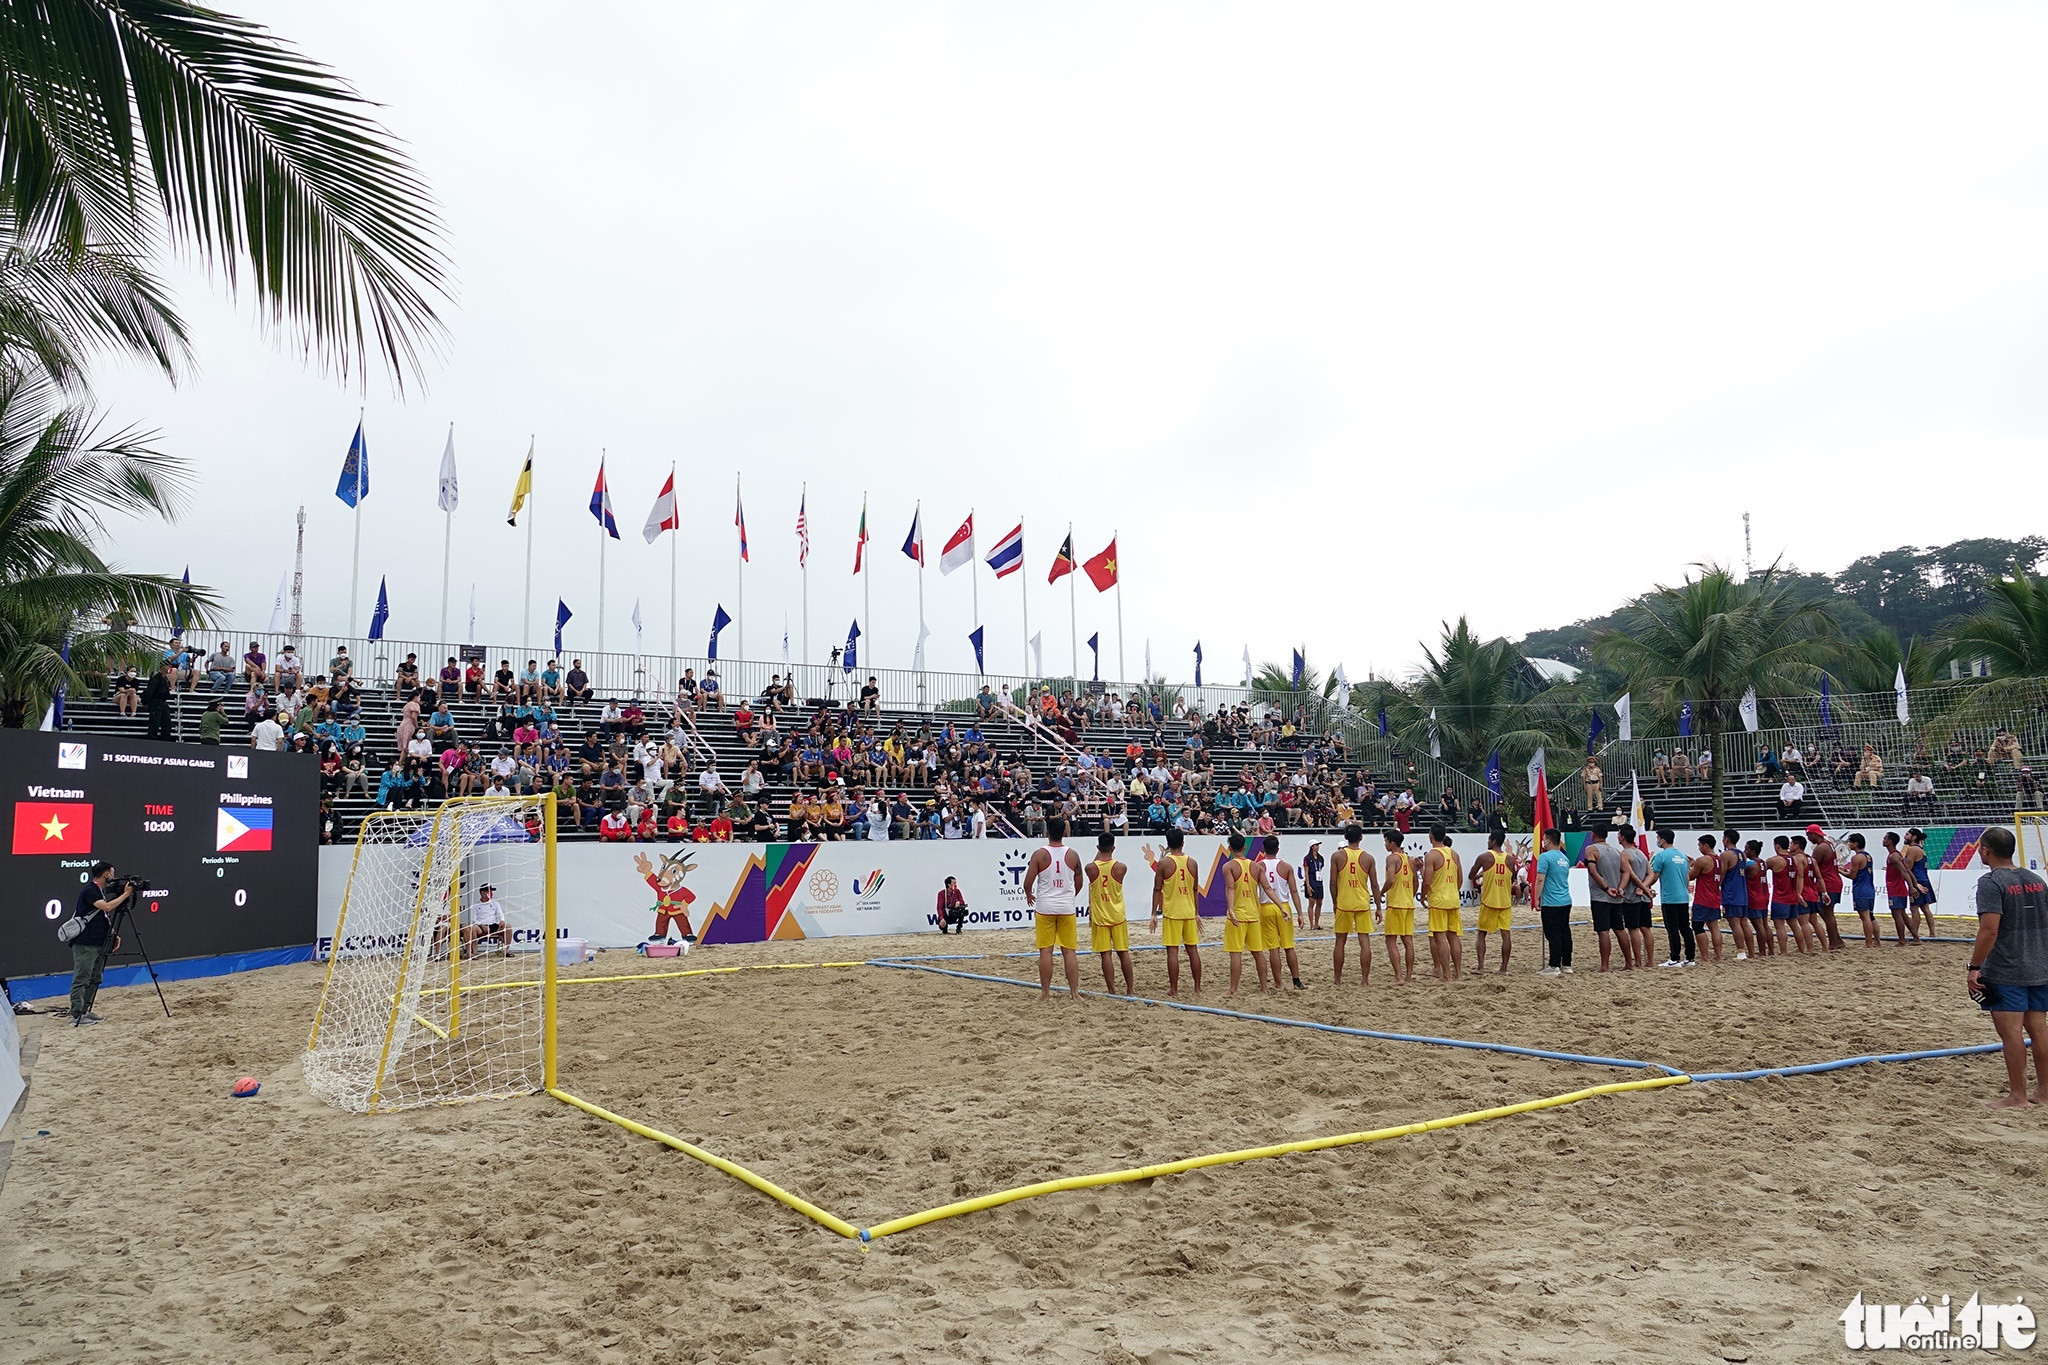 Vietnamese (yellow jersey) and Philippine athletes compete in men’s beach handball at the 31st Southeast Asian (SEA) Games in Quang Ninh Province, Vietnam, May 10, 2022. Photo: Hoang Tung / Tuoi Tre